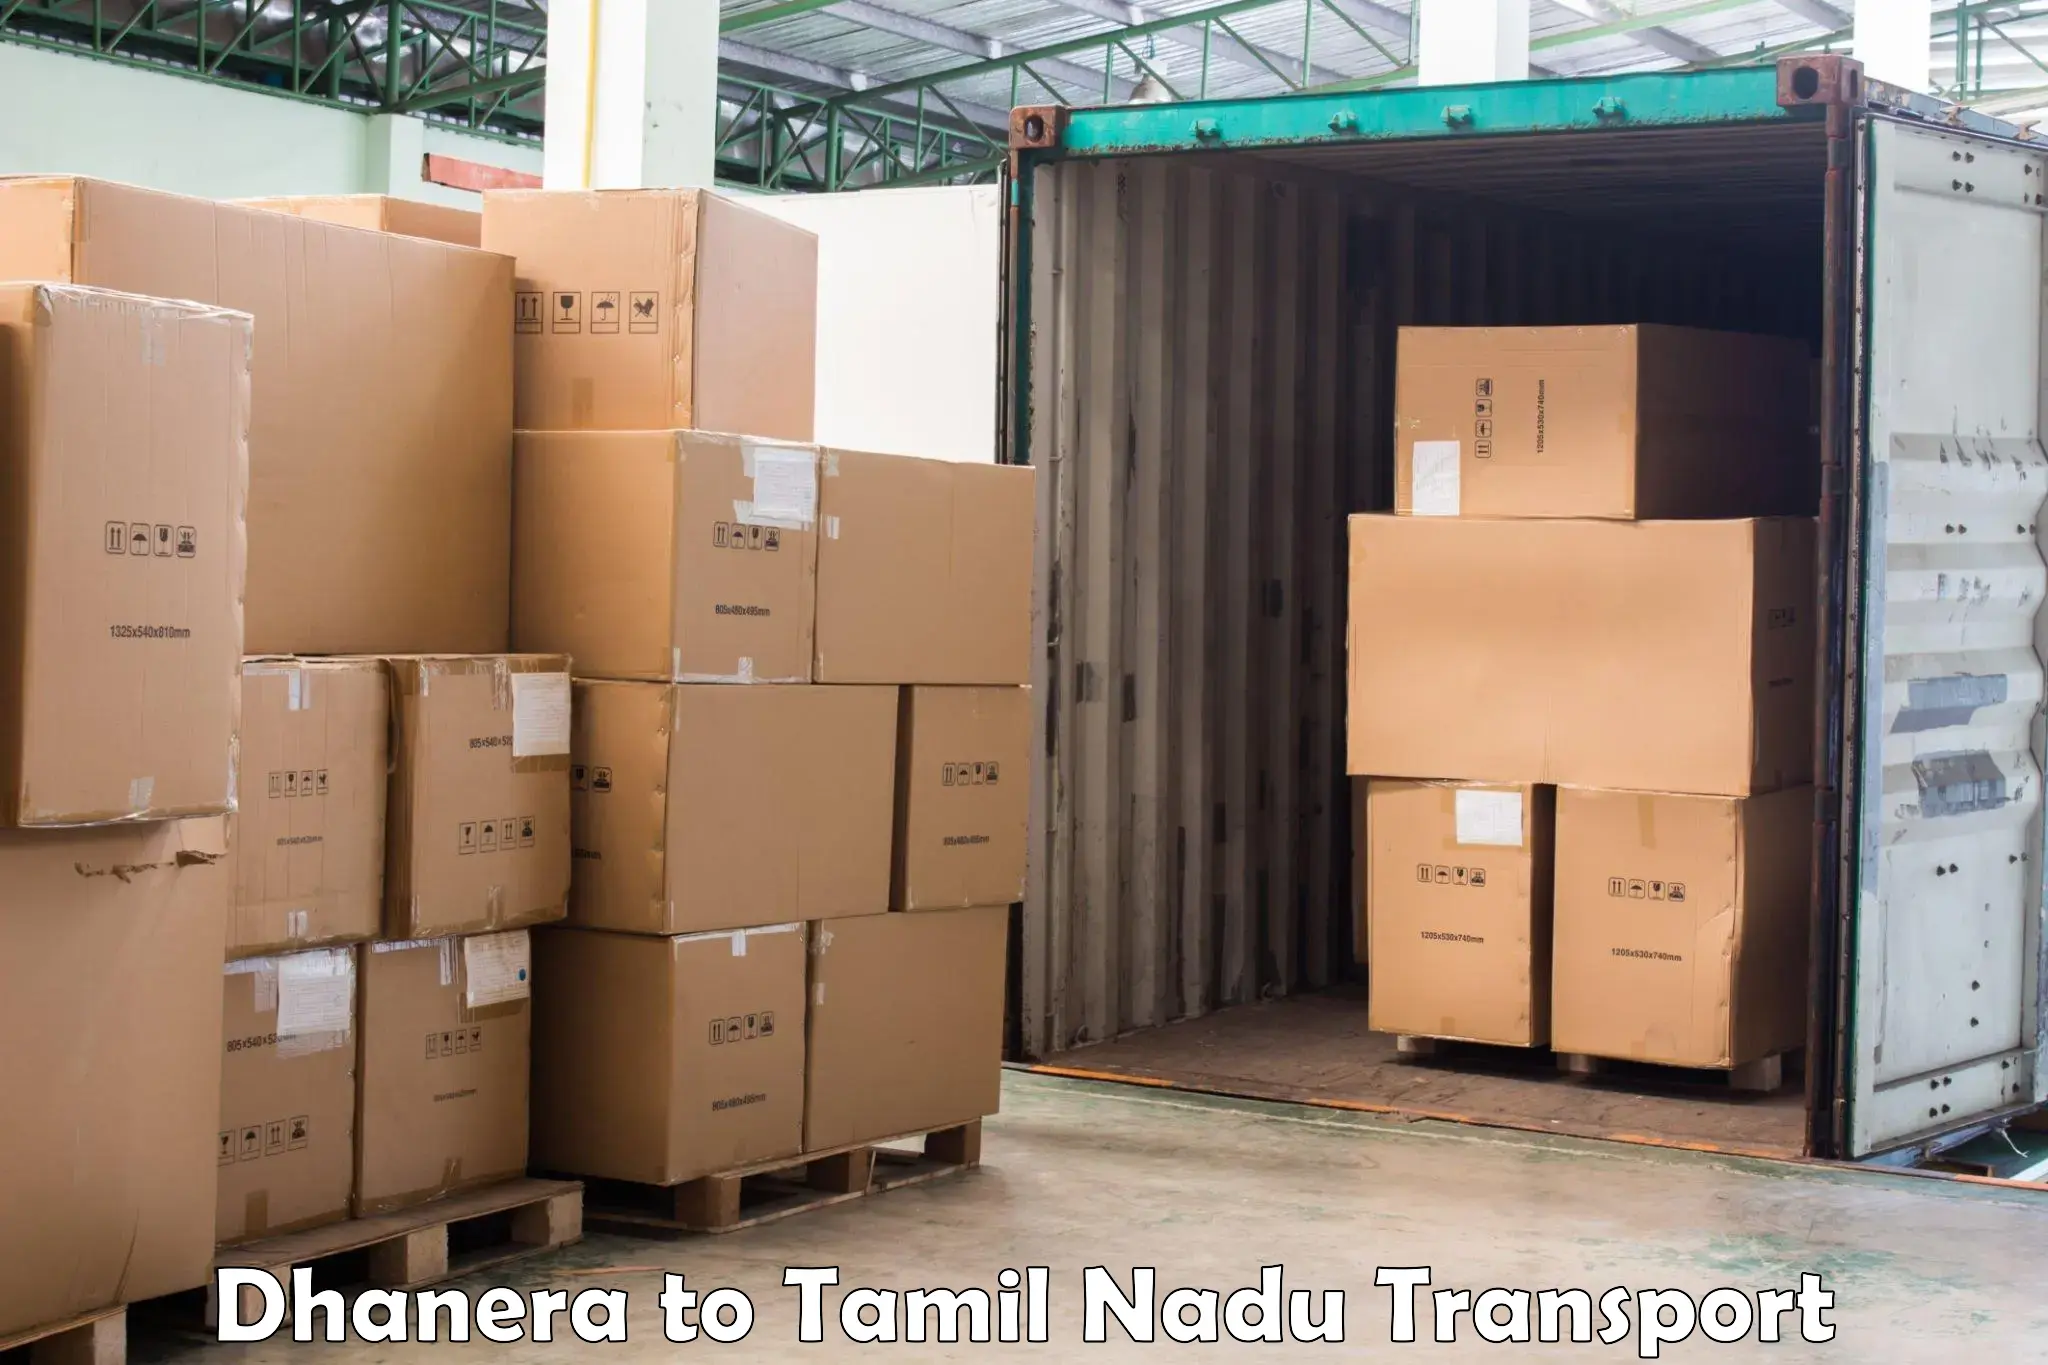 Road transport online services Dhanera to Shanmugha Arts Science Technology and Research Academy Thanjavur